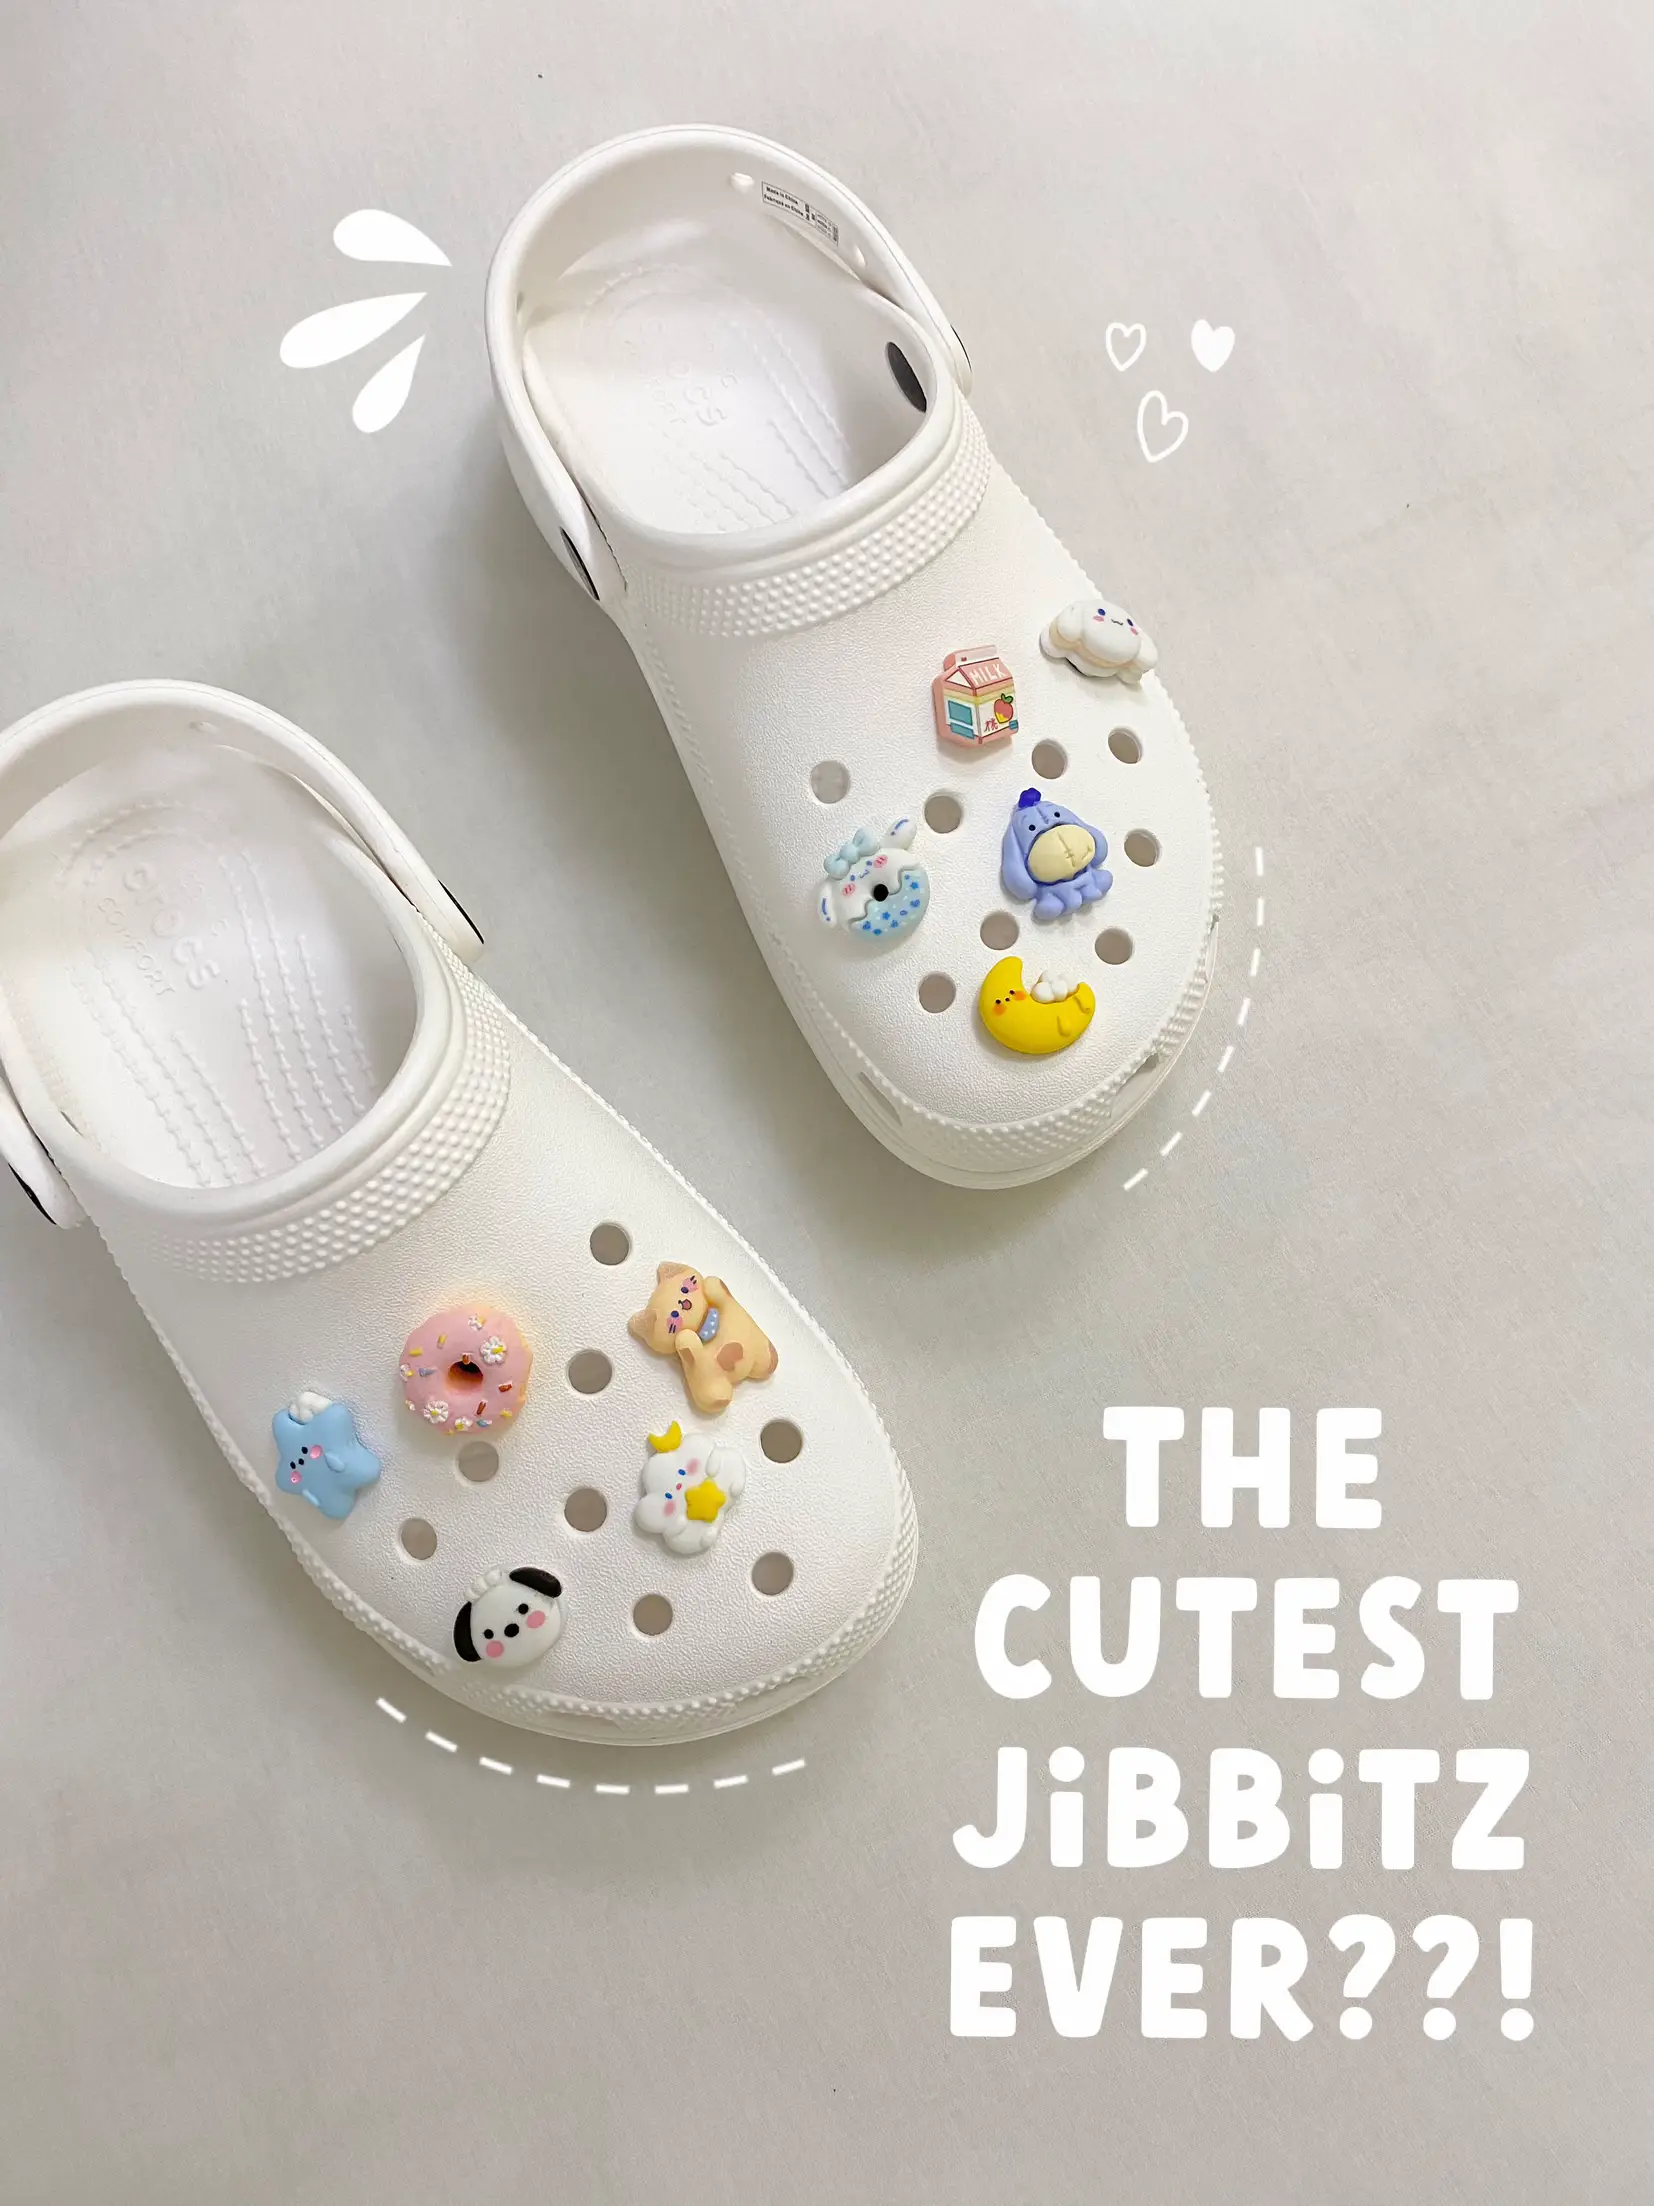 Crocs - Okay let's do this again! What's your Jibbitz charms level?